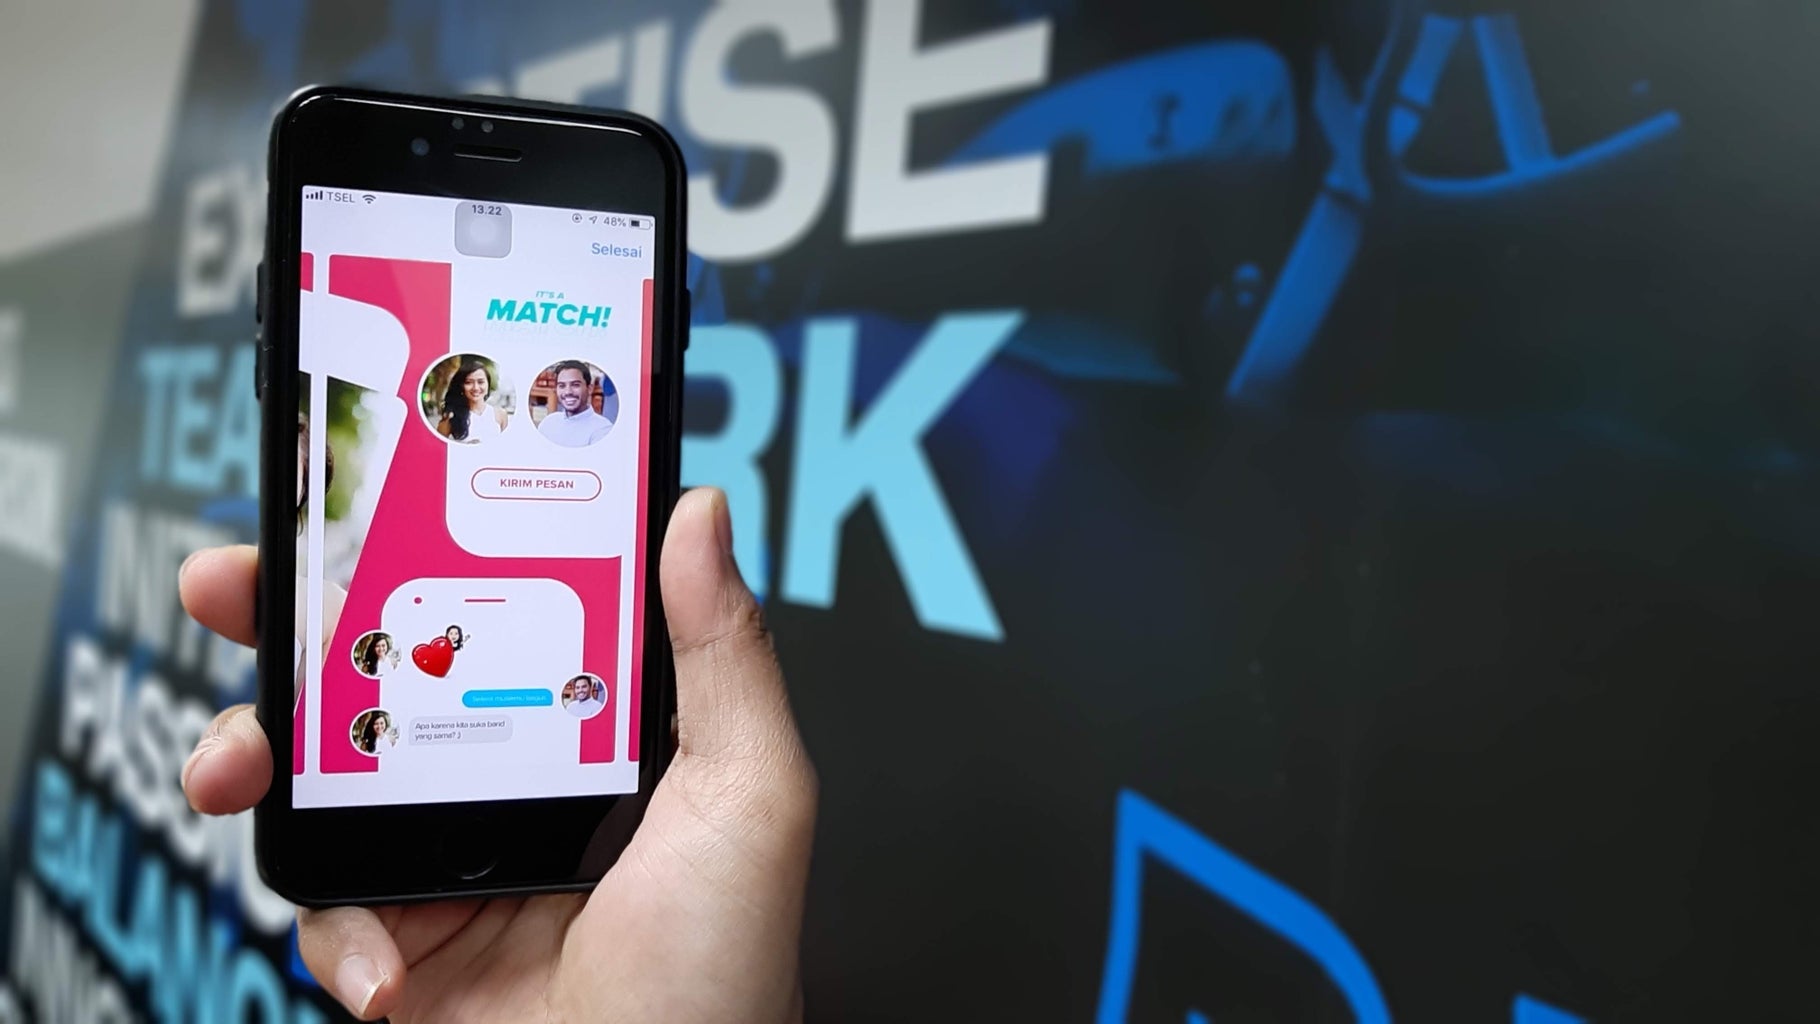 match on a dating app shown on phone screen